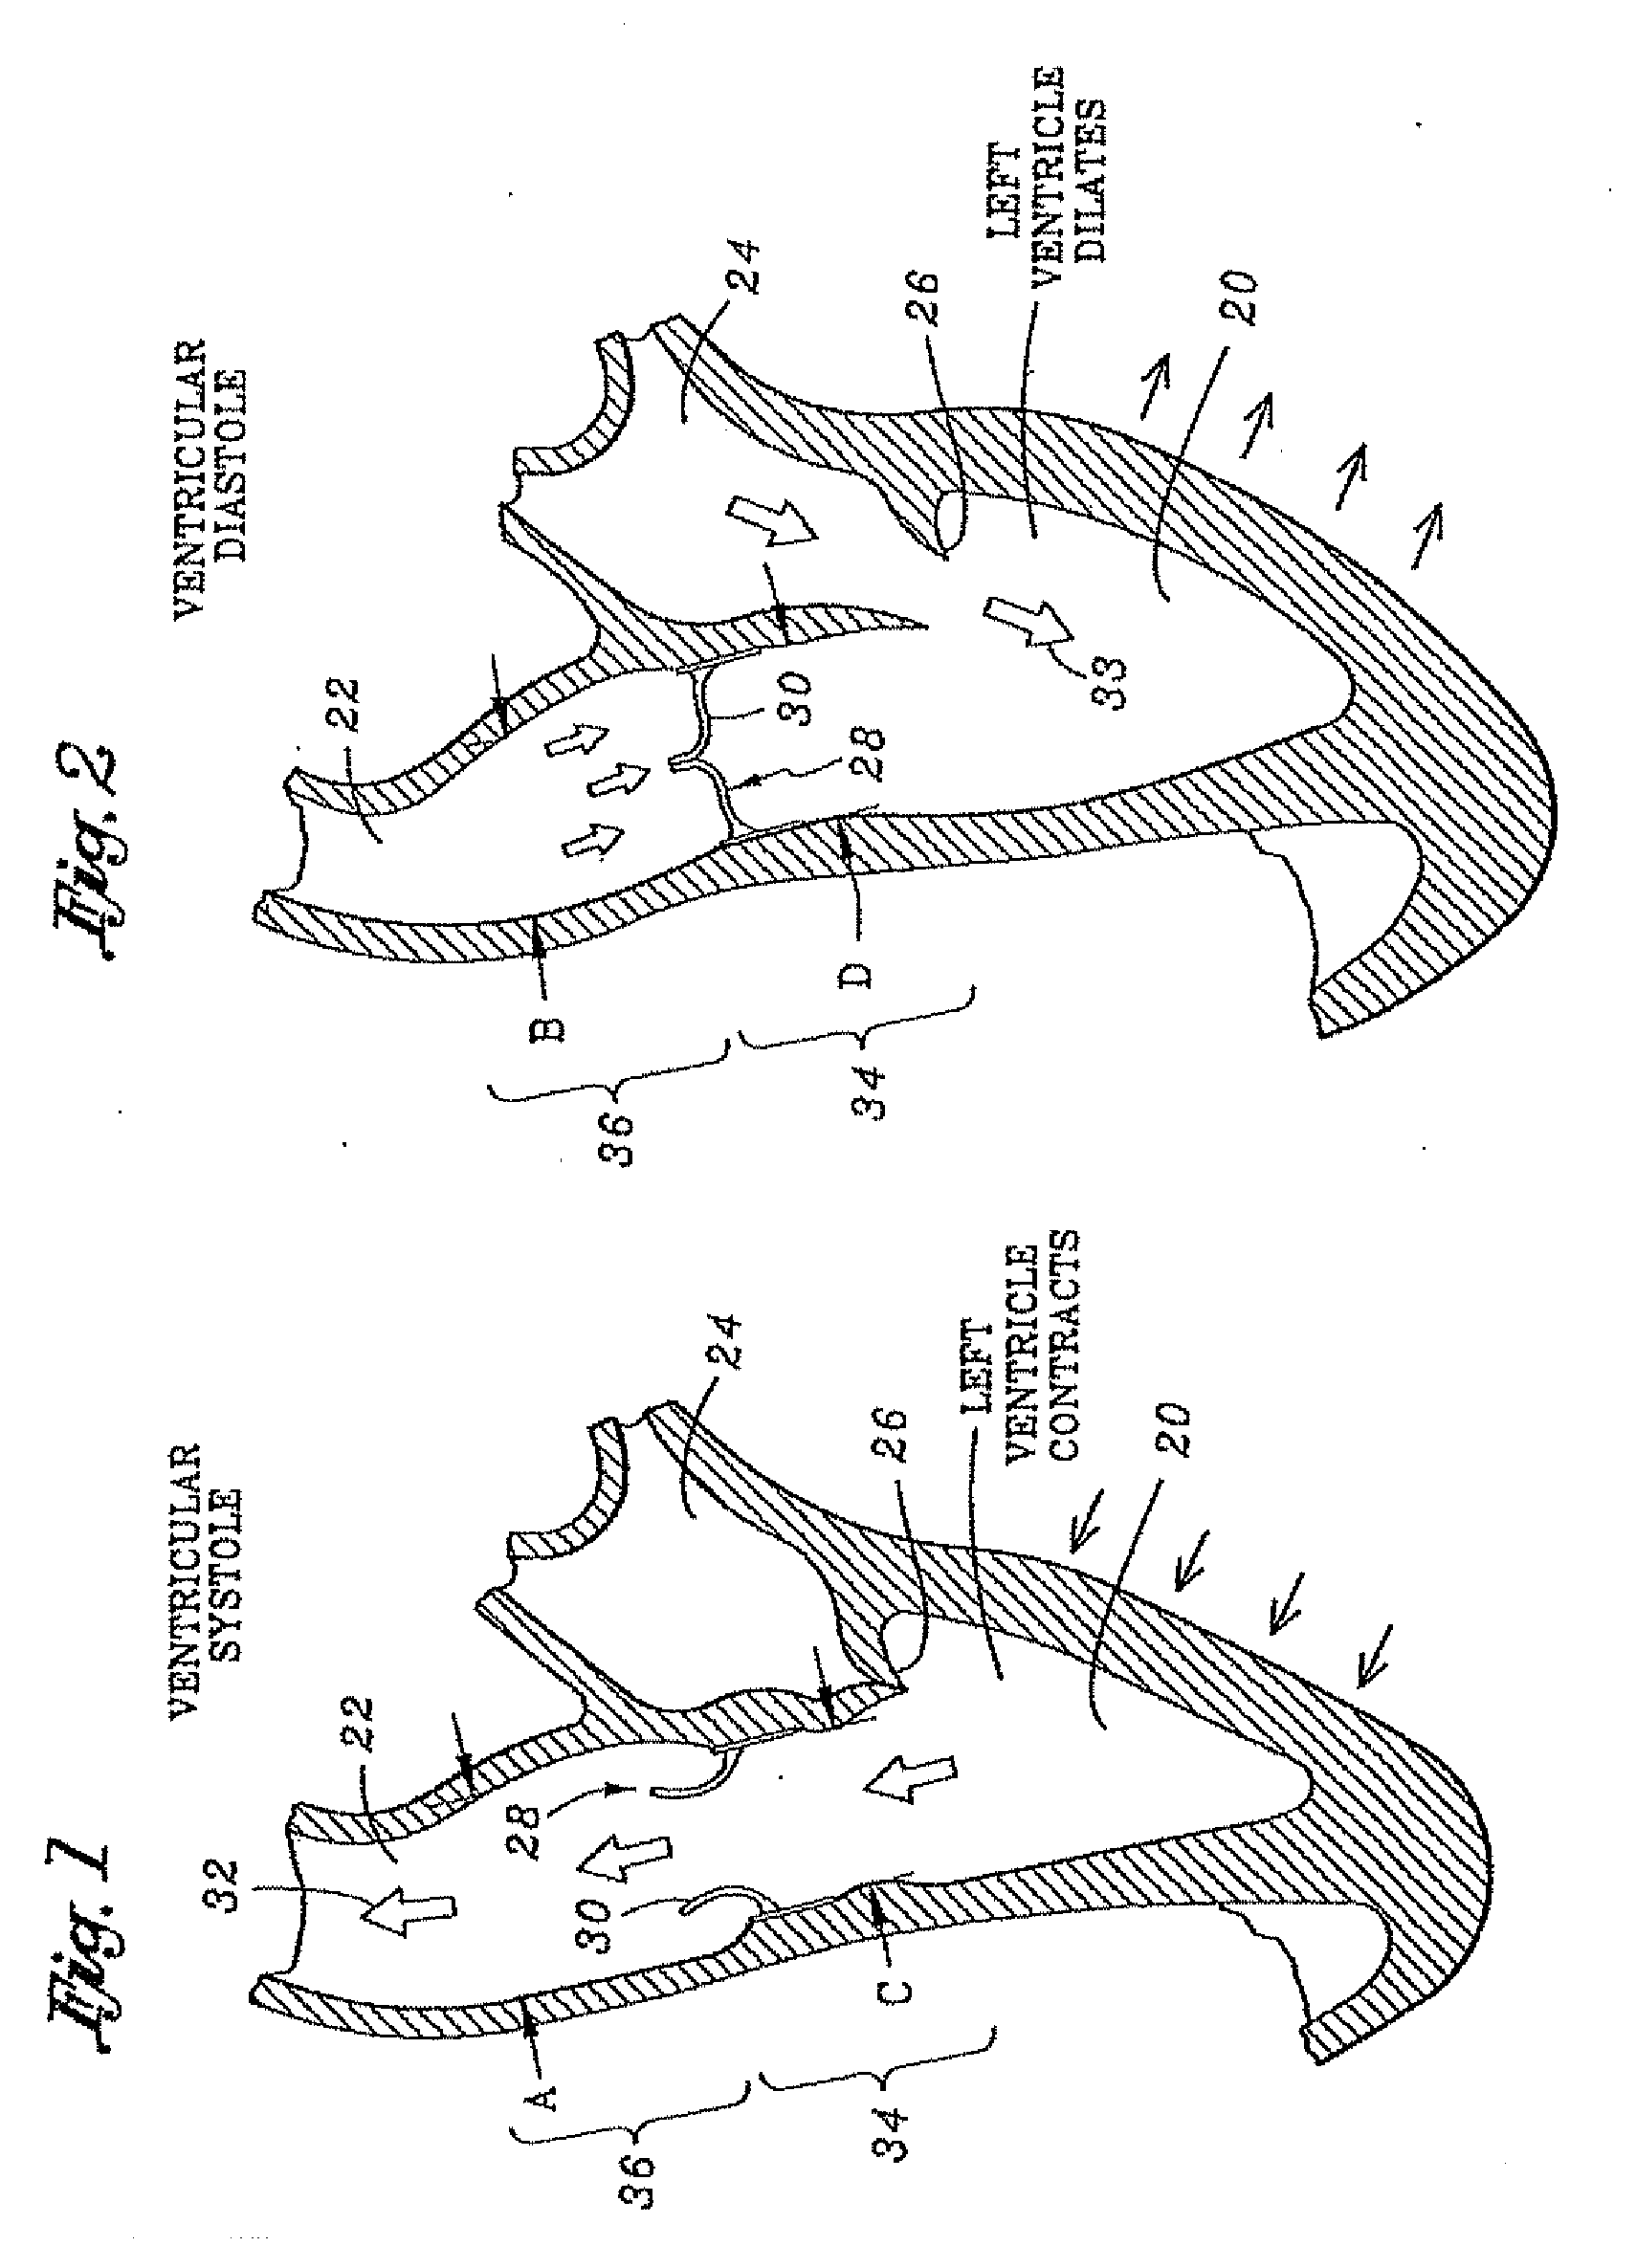 Flexible heart valve and associated connecting band